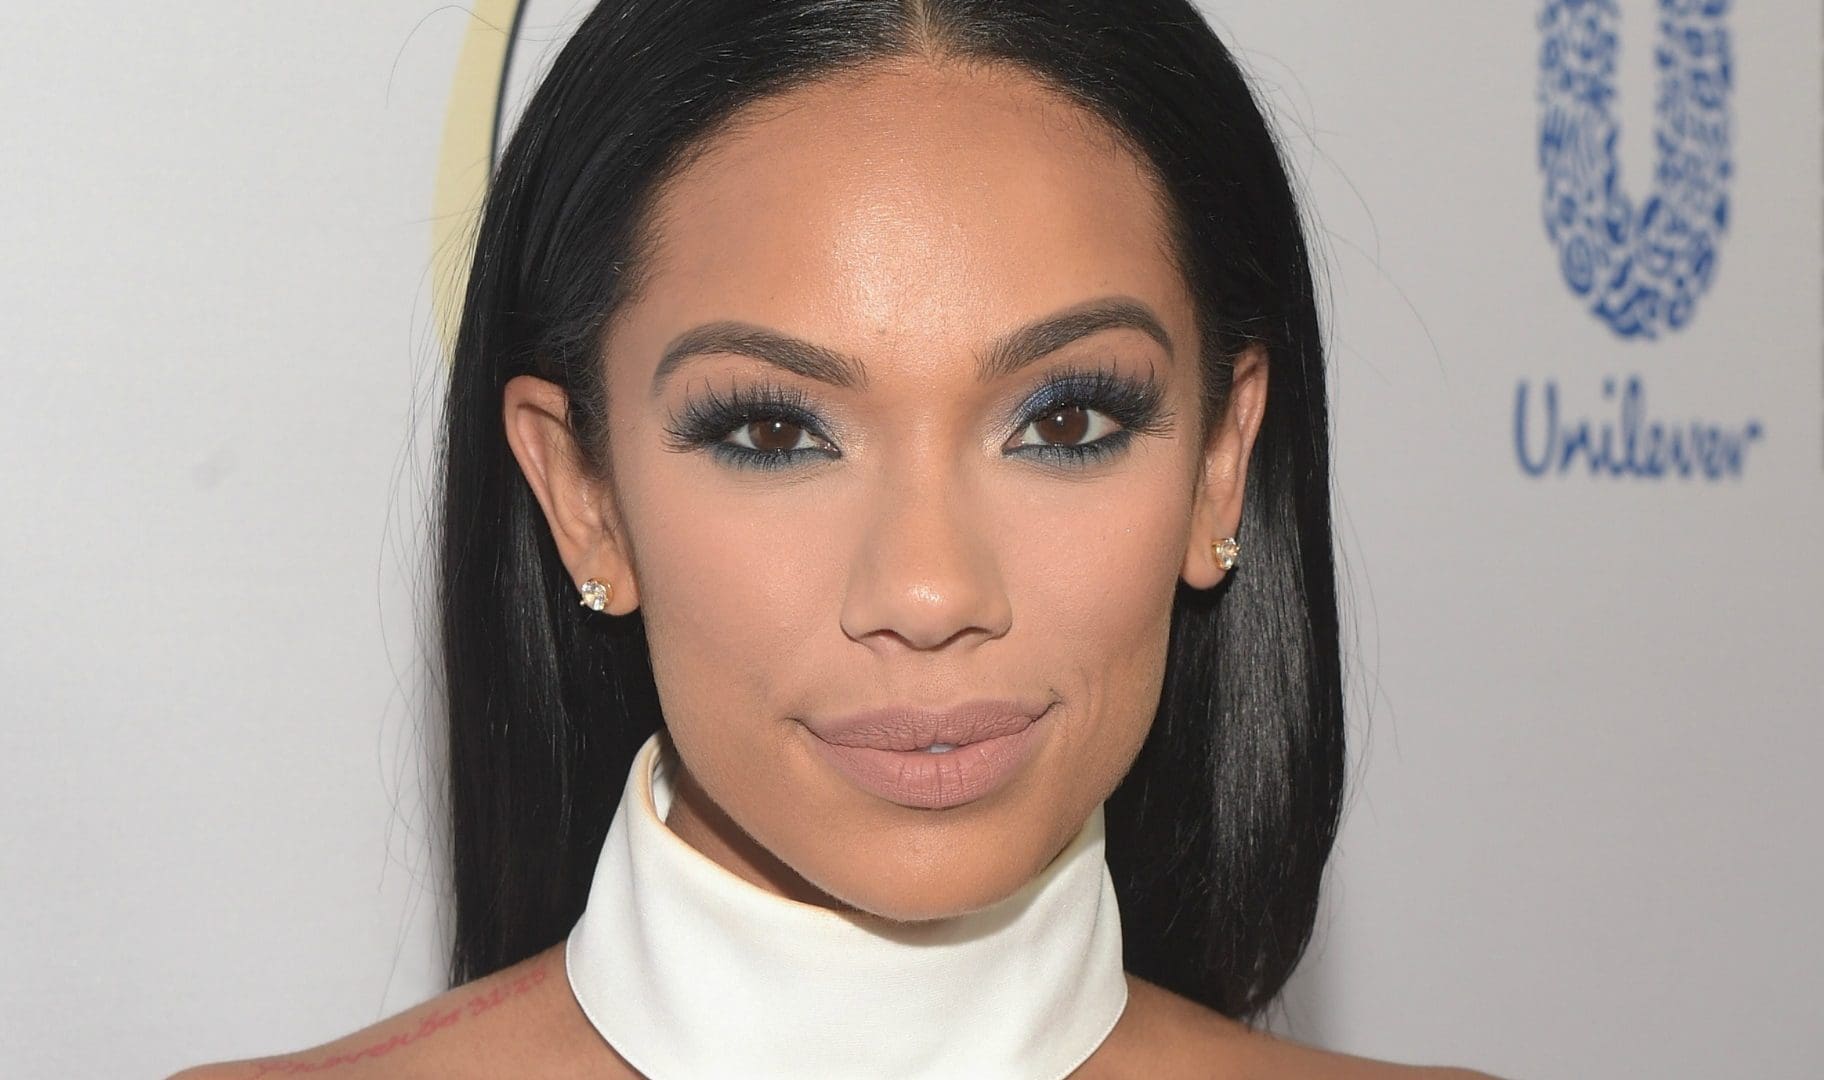 Erica Mena Shares Words Of Wisdom With Her Fans